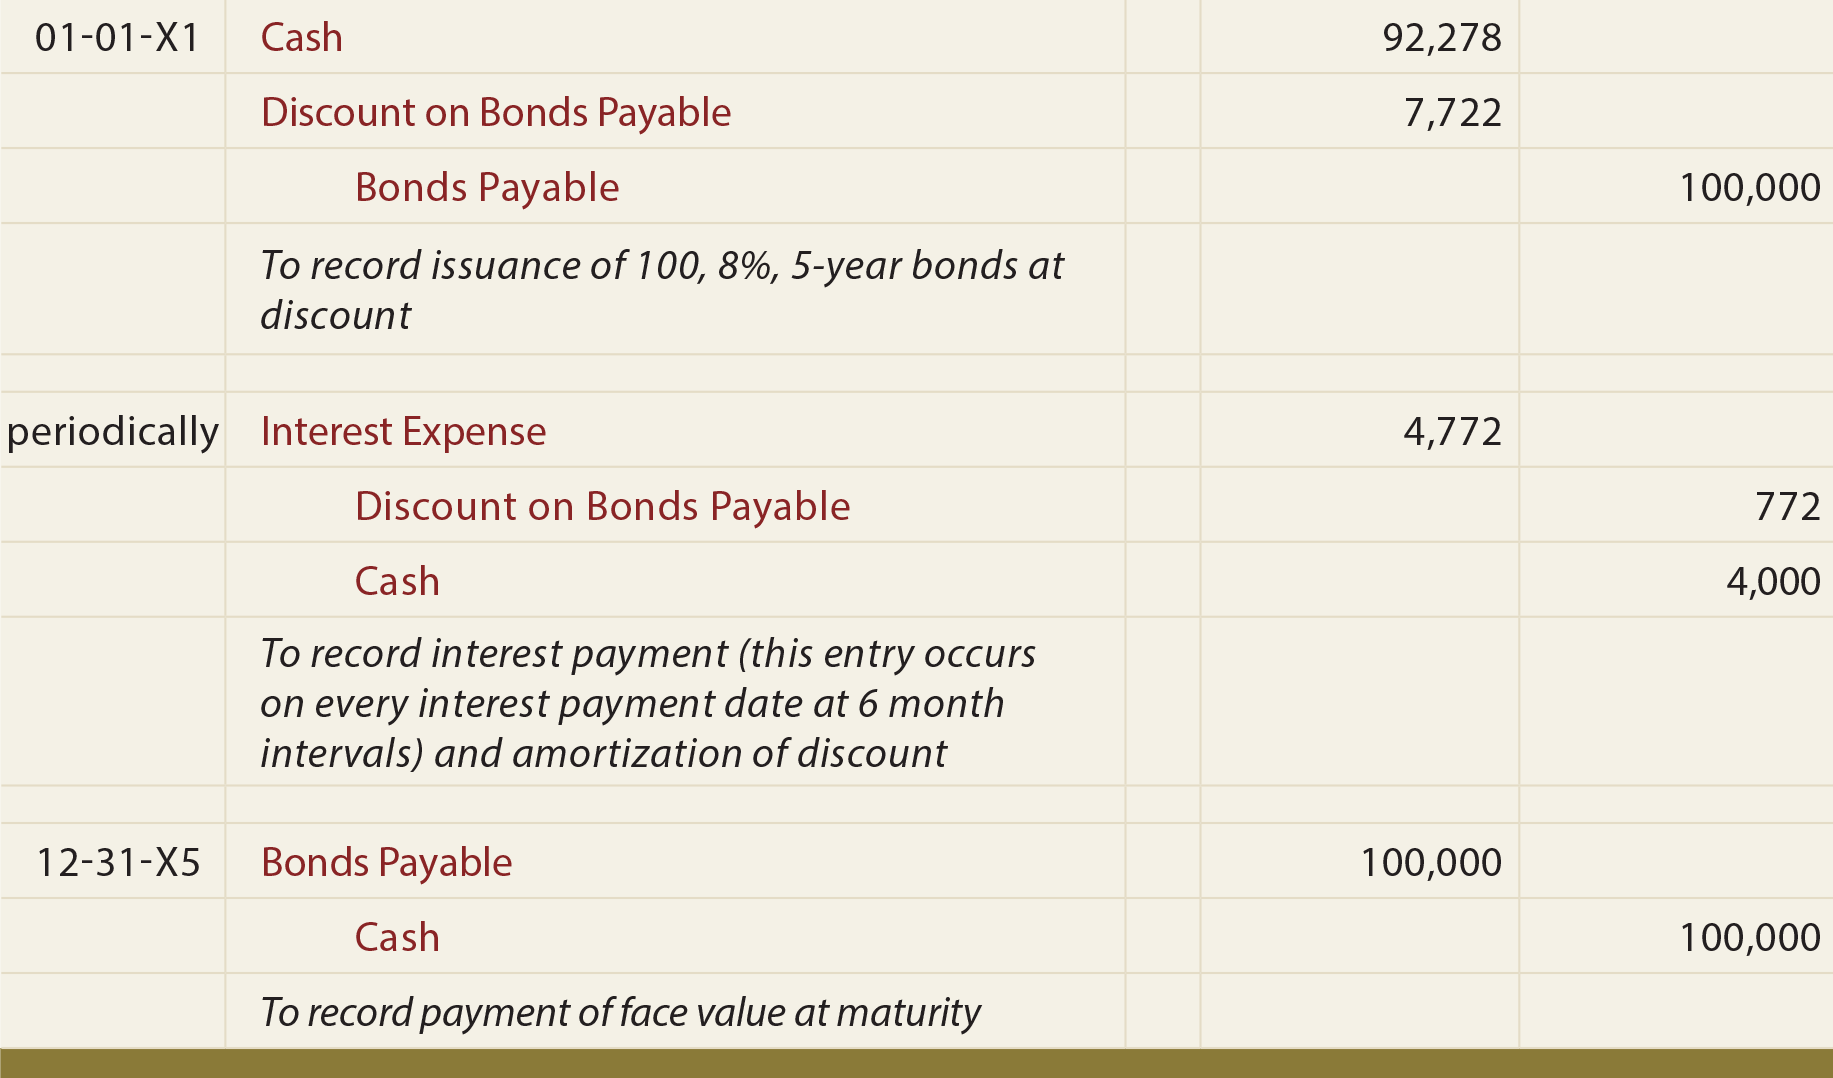 Bonds Payable at a Discount General Journal Entries - Bonds payable at discount